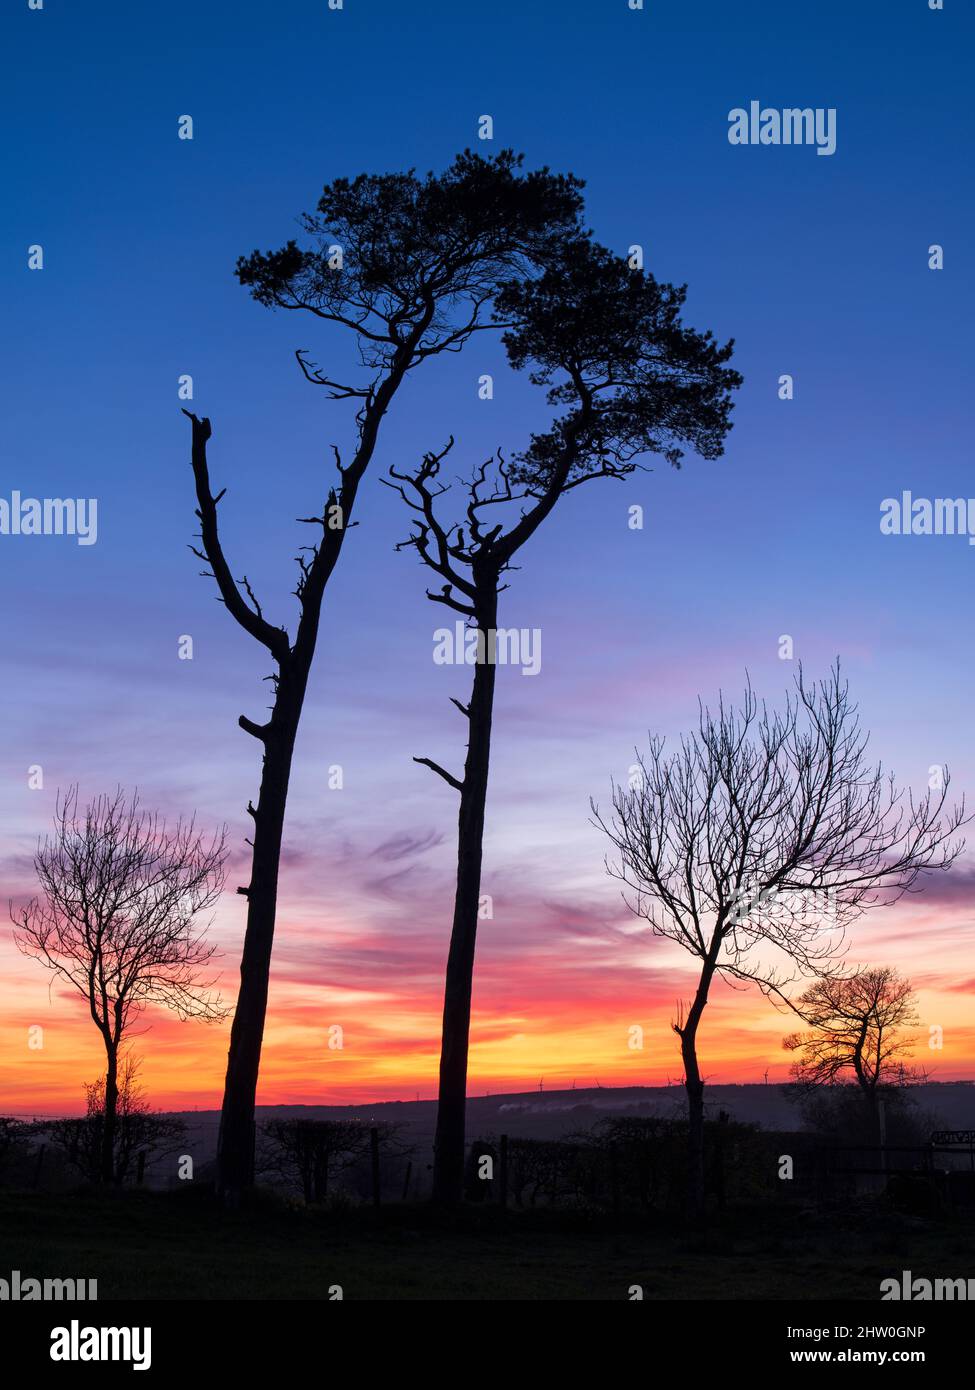 A colourful sunset silhouette of a group of trees. Stock Photo